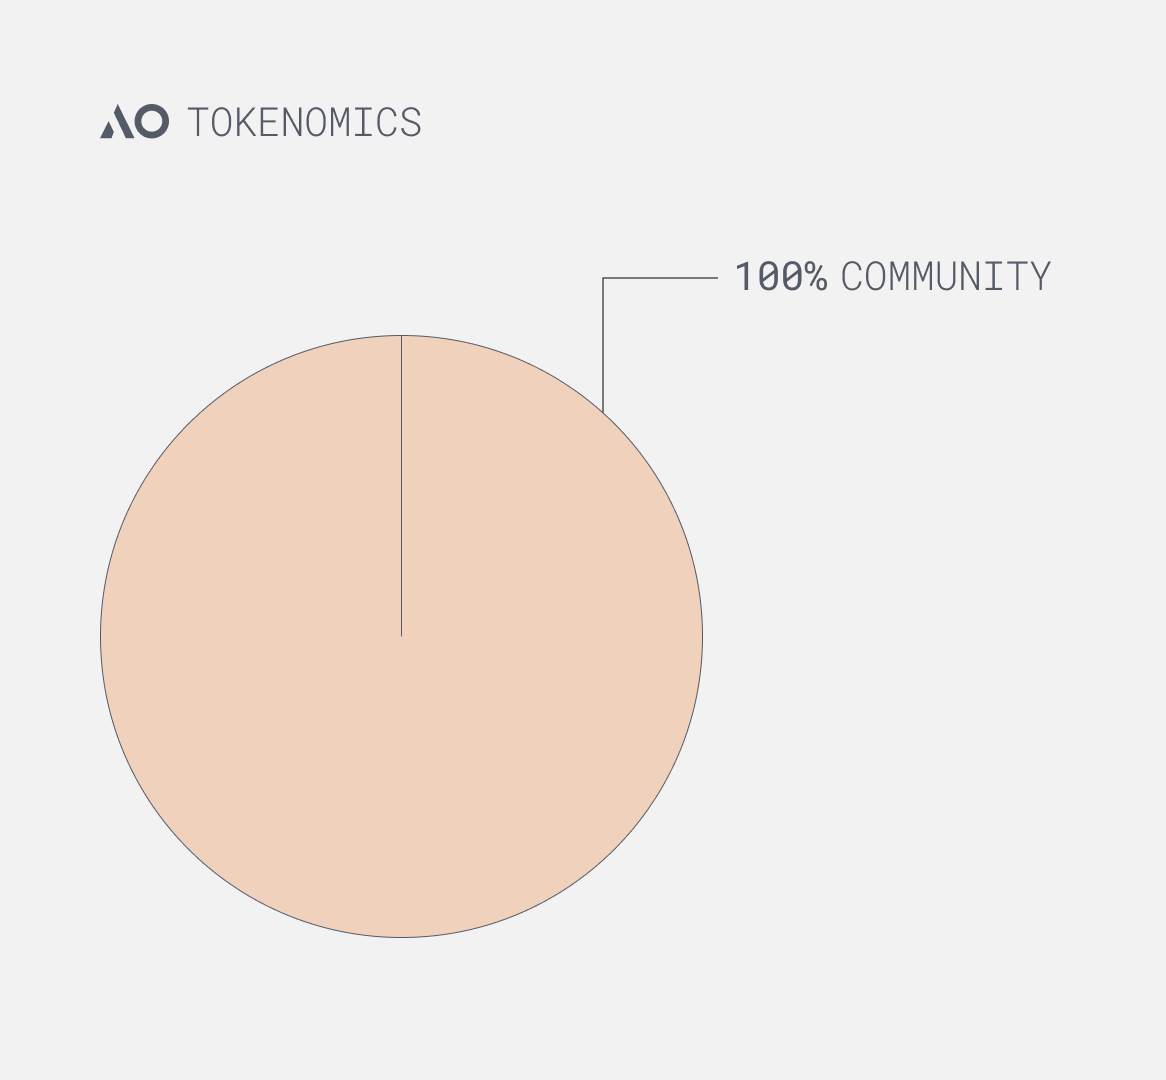 AO will have its own token.

Existing models are broken. A radically new approach:

1️⃣ $AO will be 100% fair launch. Zero pre-mine, pre-sales, preferential access etc.
2️⃣ Every single token will be minted by bridging to AO, holding $AR, or building.
3️⃣ 21m, 4 year halving.